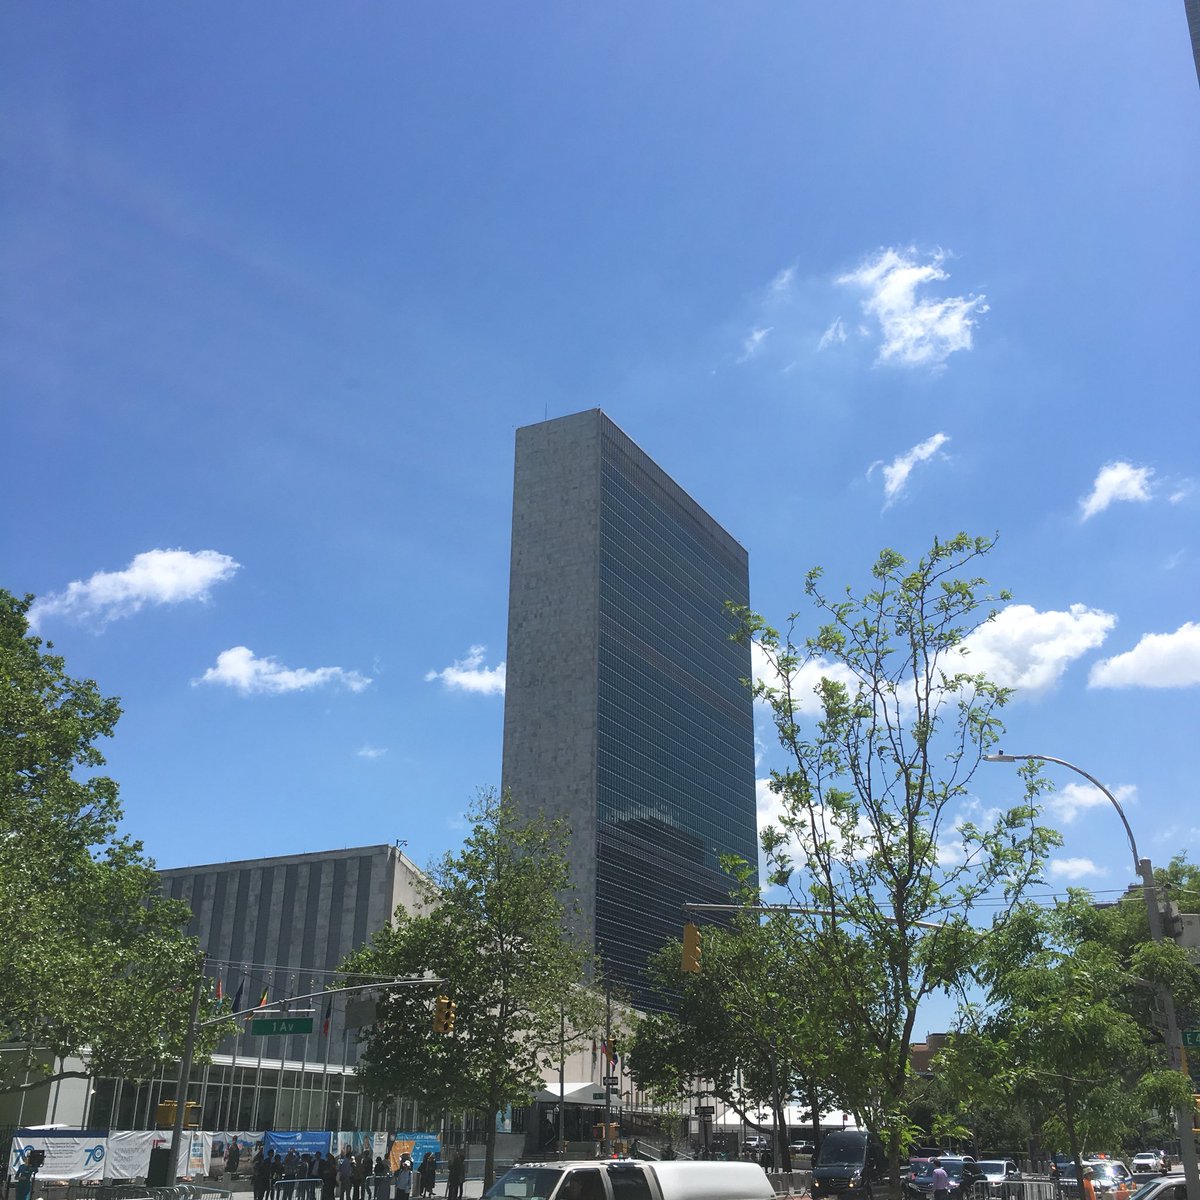 Good move to take a lunchtime walk with @lovethoseknicks and pass by the #UN on an amazing day in #nyc. #nycphotographer #nycphotography #nycskyline #nycbuildings #nycskyscrapers  #eastside